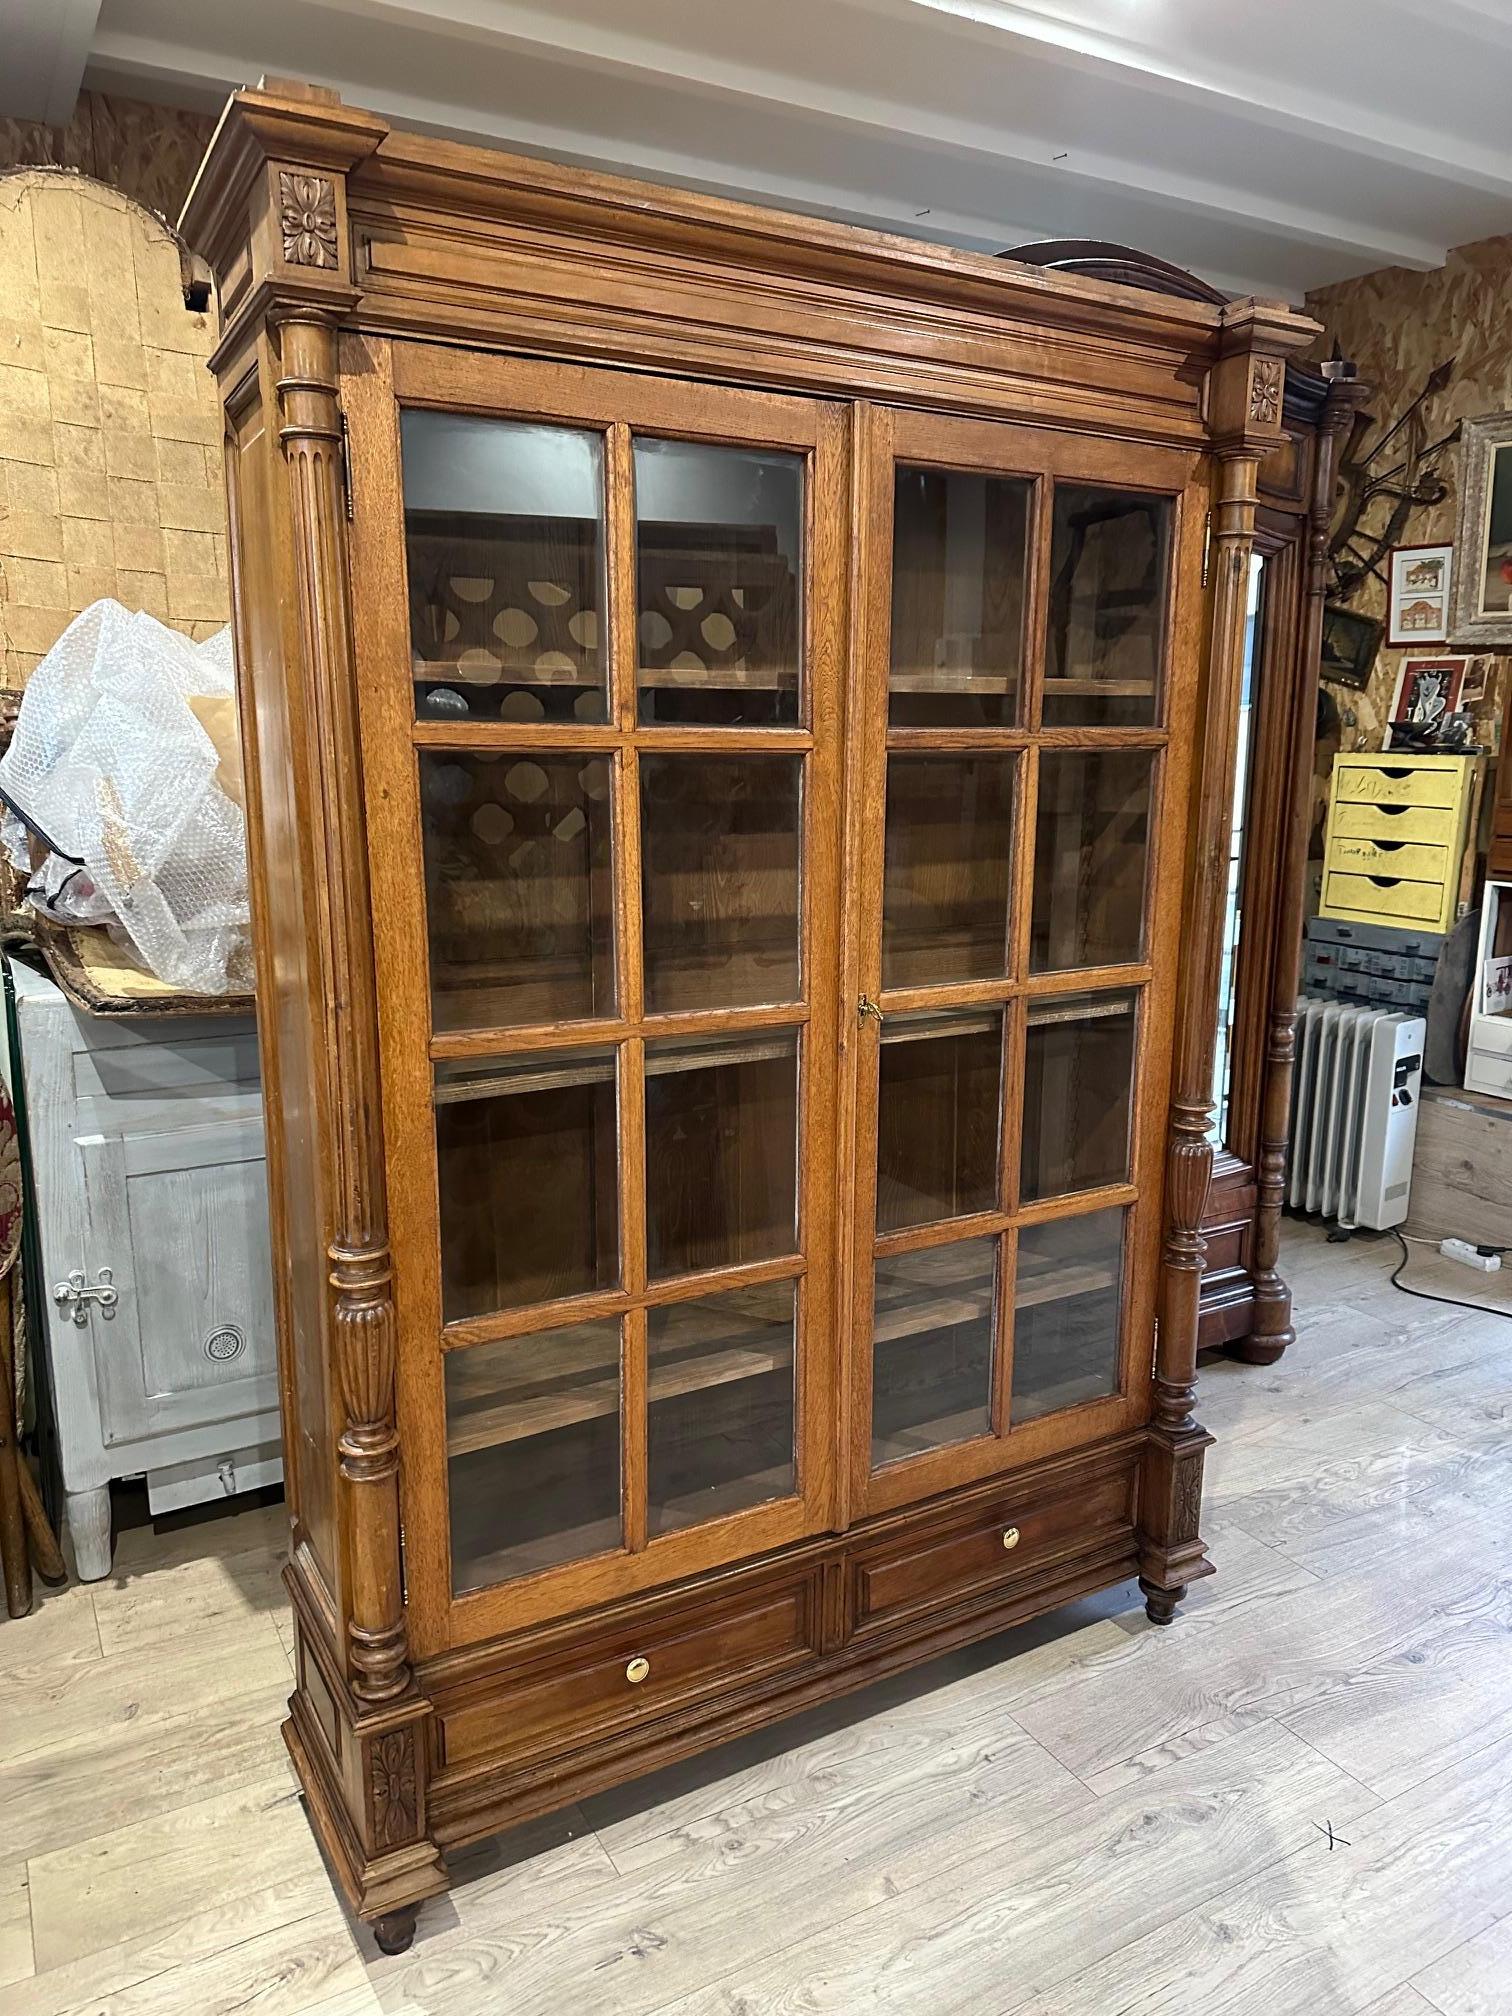 Very beautiful walnut vitrine dating from the beginning of the 20th century. Several removable shelves as you wish. 
Hook on the middle shelf used to hold the door closed.
Two glass doors with wooden squares. Columns on each side which adorn the